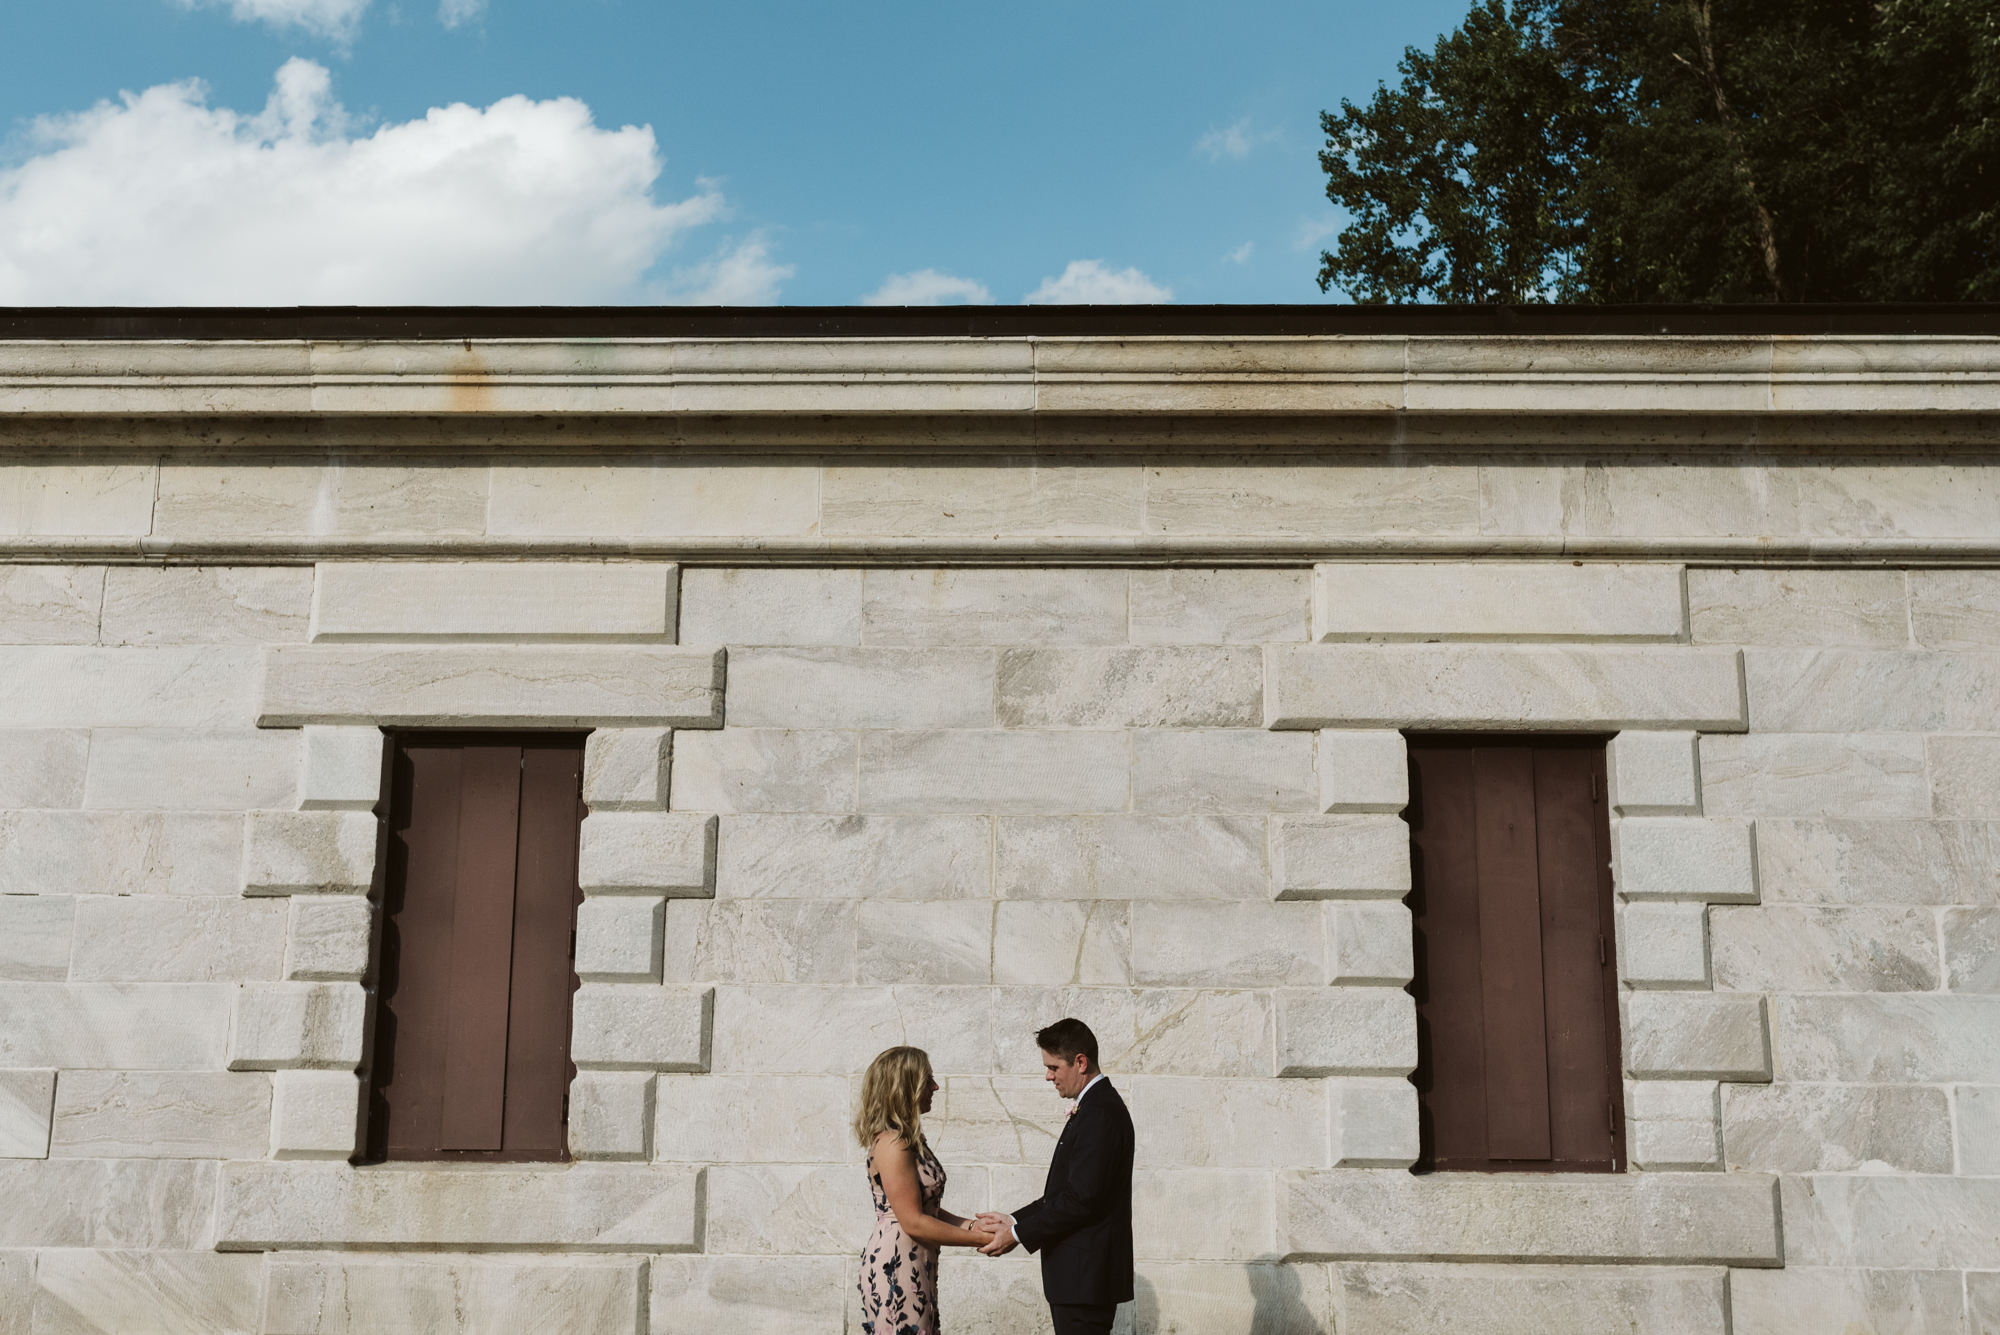 Pop-up Ceremony, Outdoor Wedding, Casual, Simple, Lake Roland, Baltimore, Maryland Wedding Photographer, Laid Back, Bride and Groom Portrait, Pump House at Lake